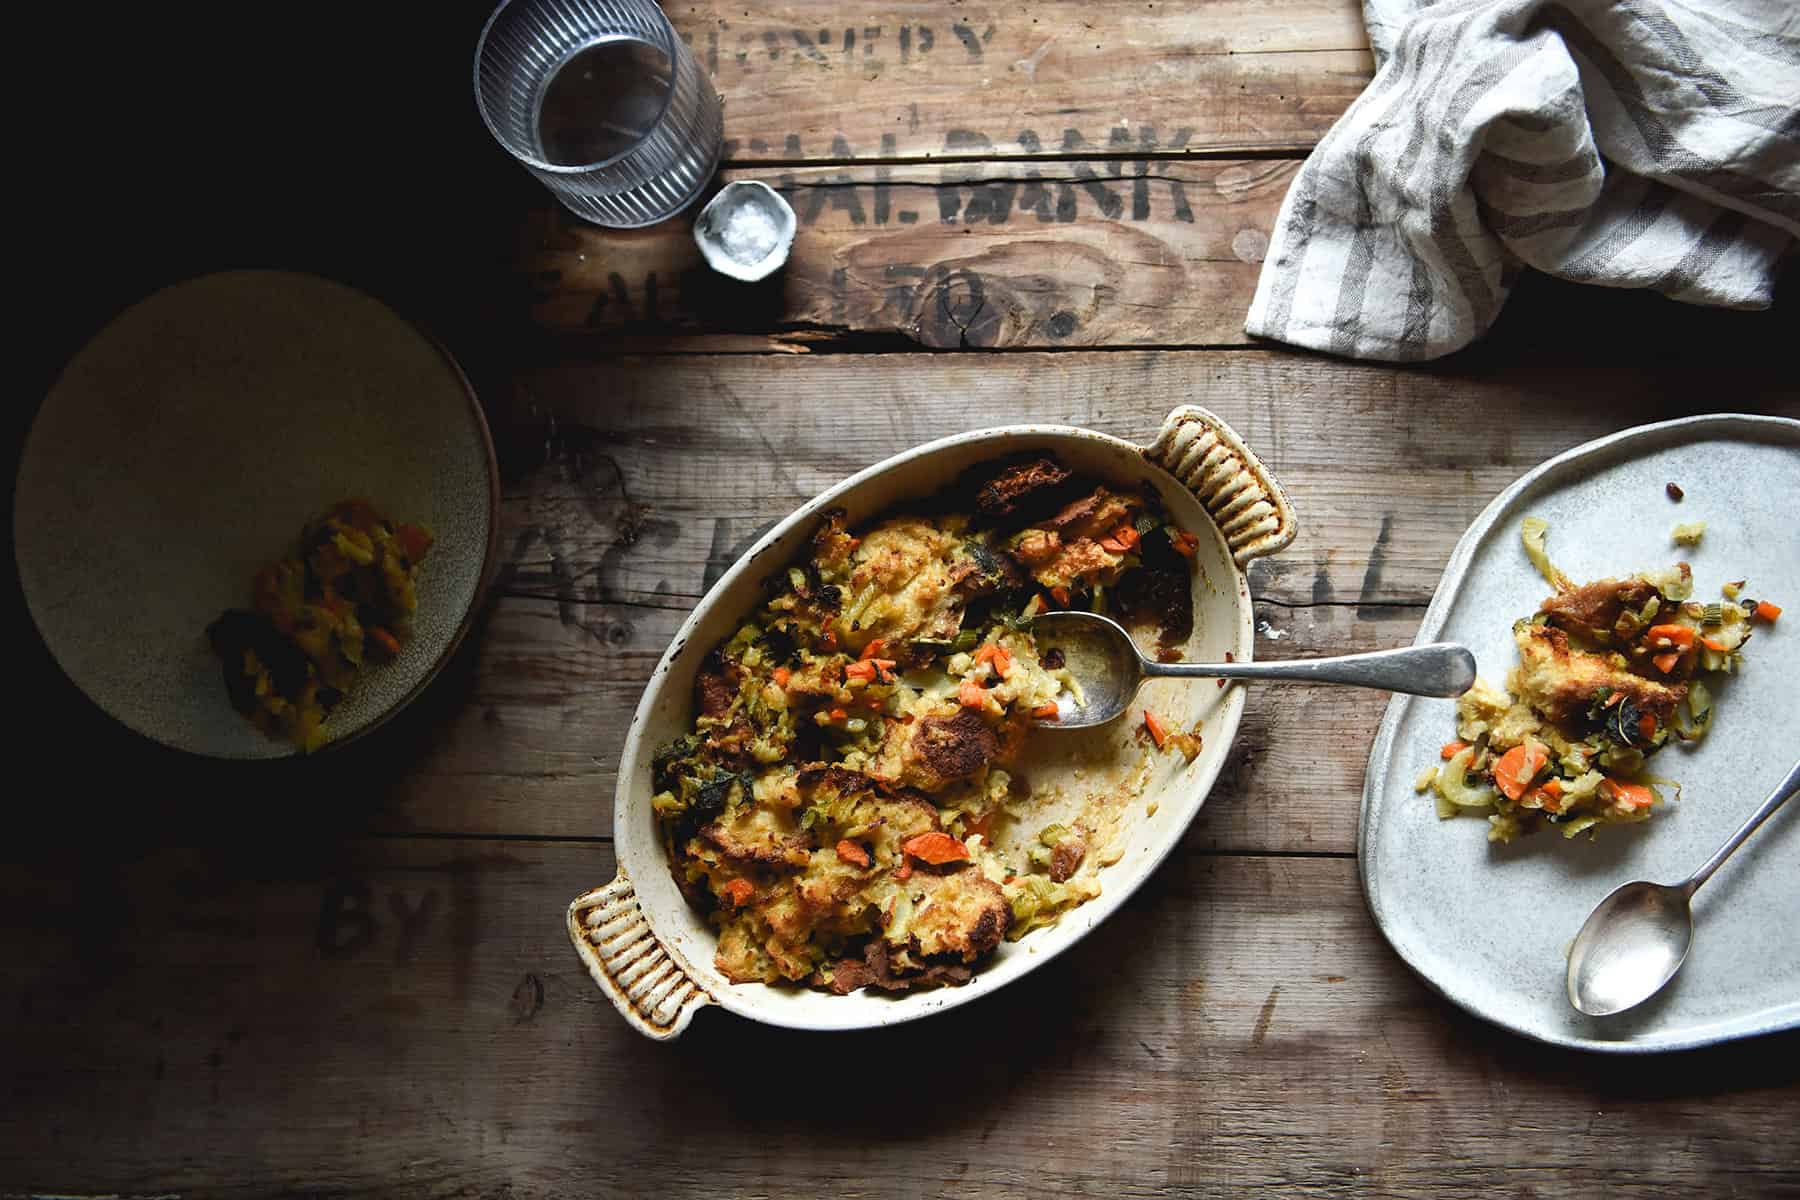 An aerial image of FODMAP friendly, gluten free vegan stuffing in a scalloped baking dish atop a moody wooden table. The dish of stuffing is surrounded by extra plates and neutral toned linen tea towels.